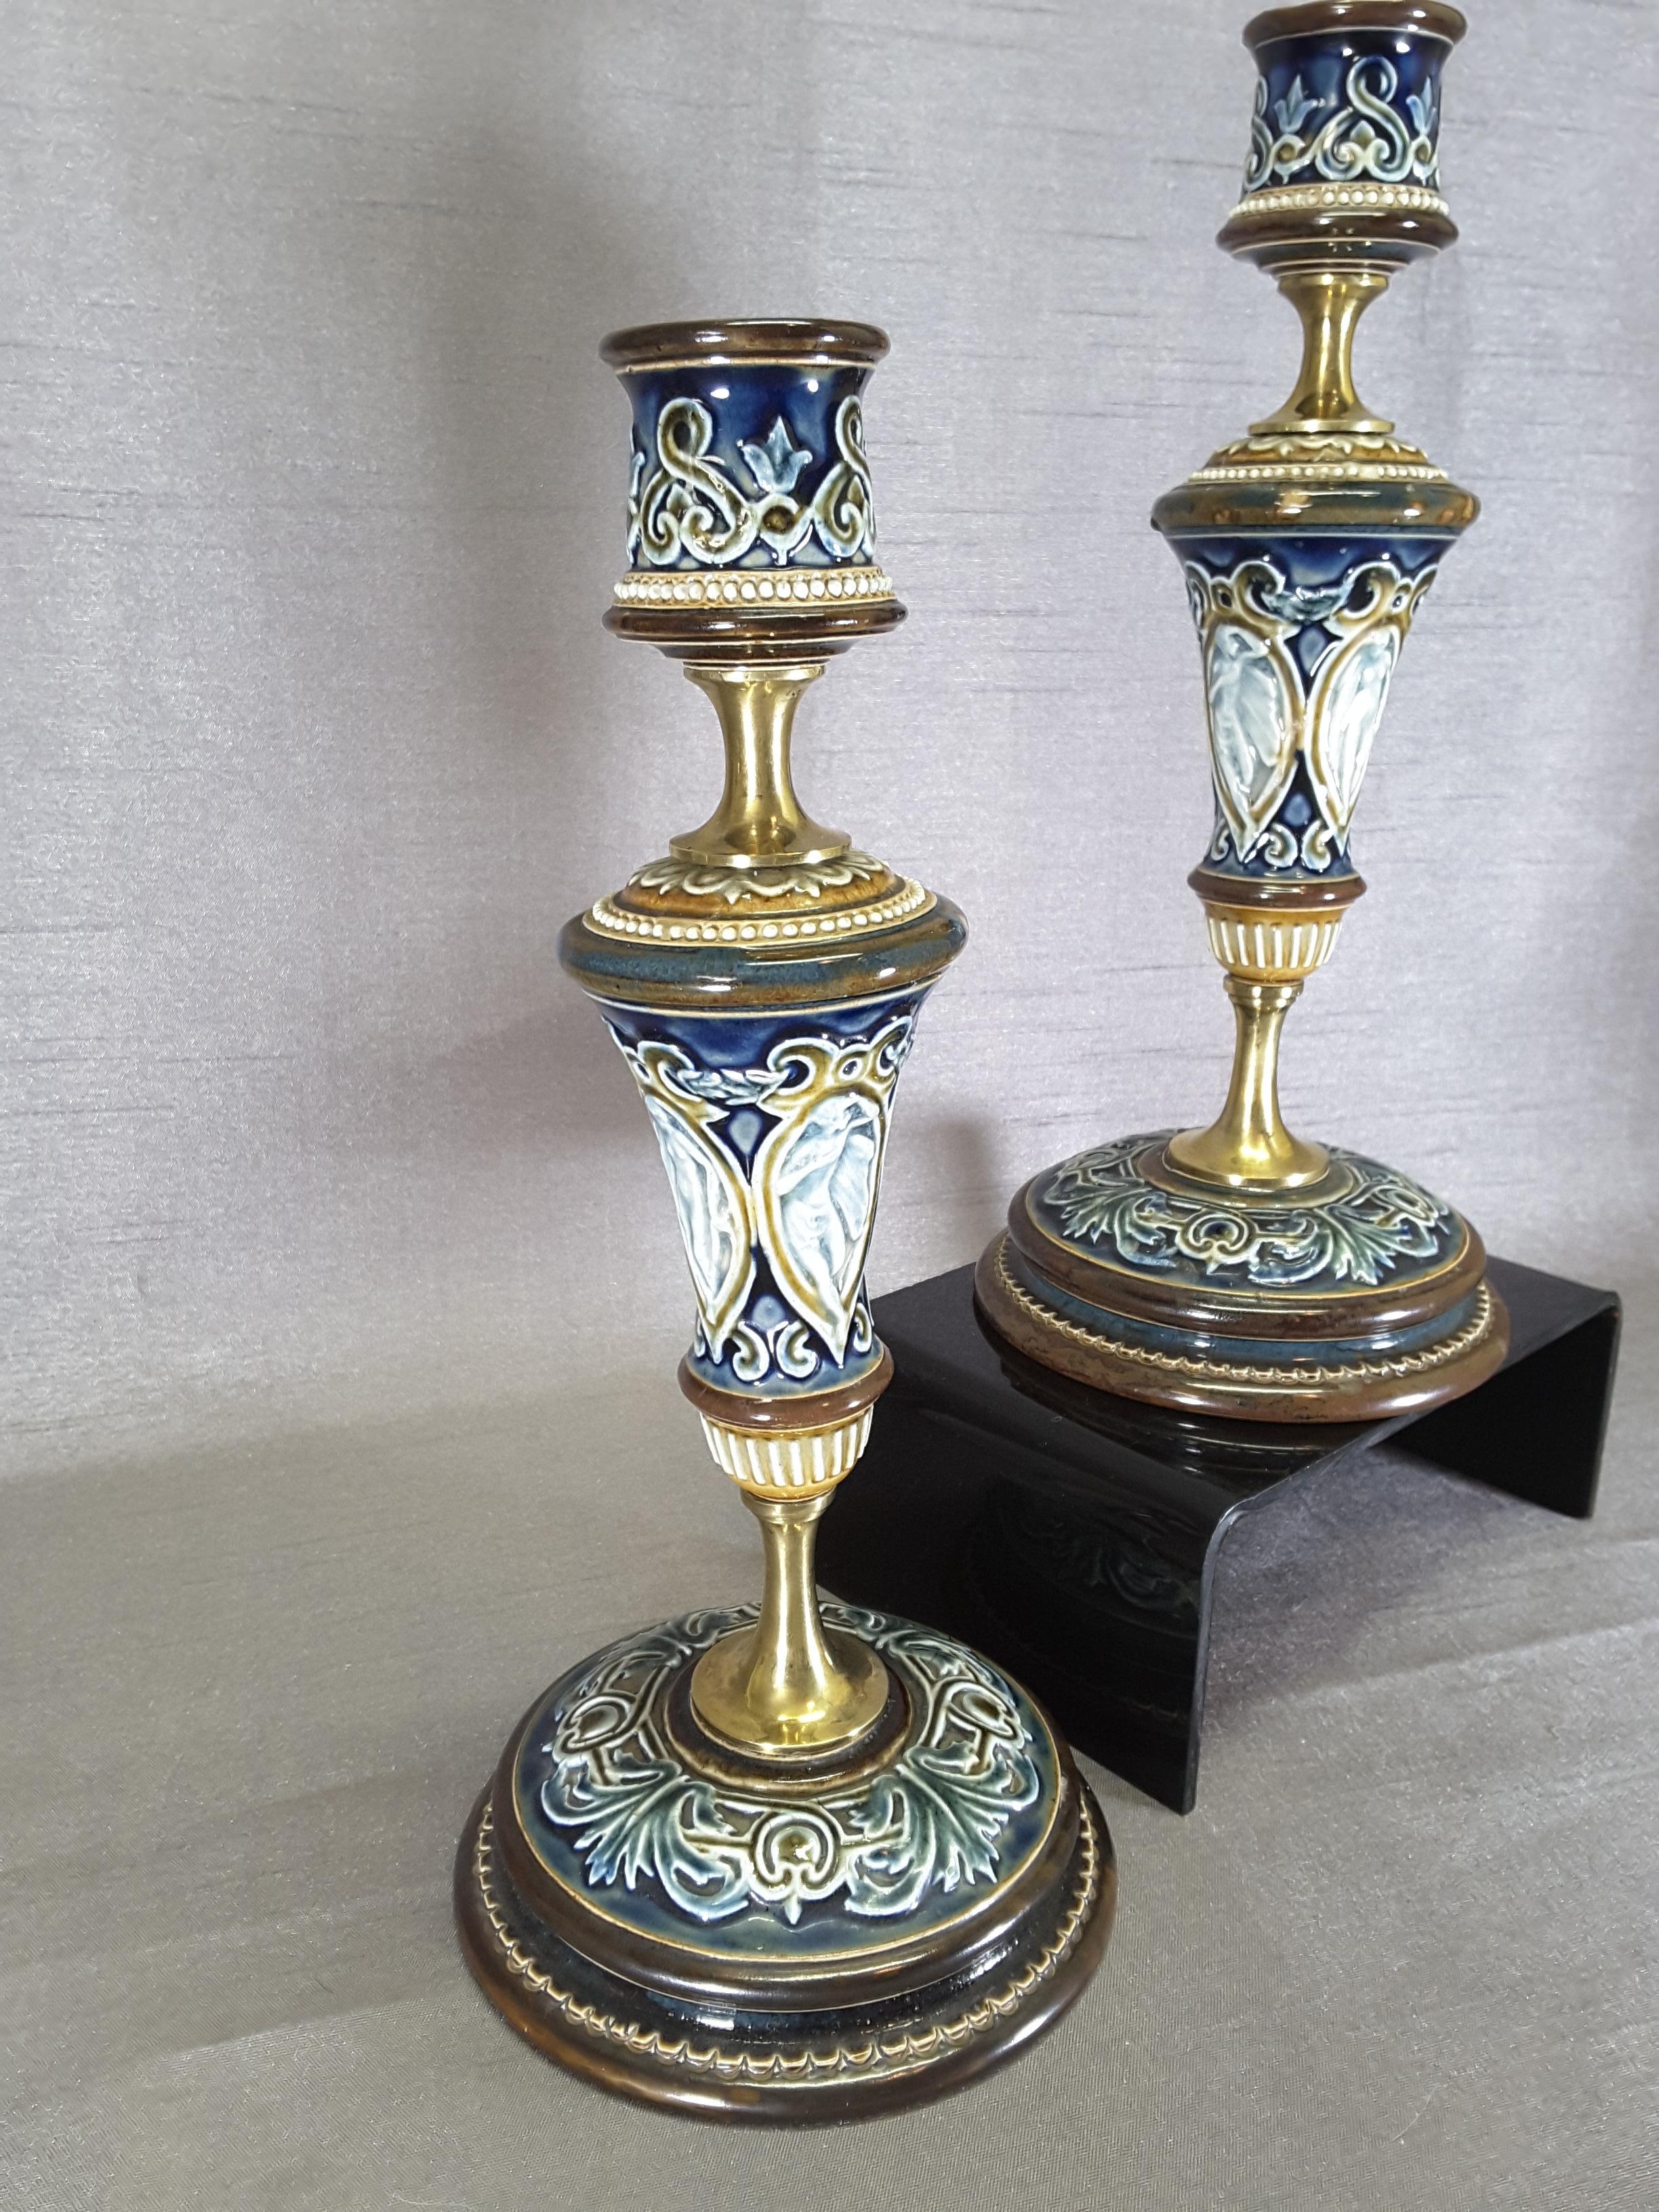 Pair of Doulton Lambeth Candlesticks, circa 1890.

Stoneware and brass spacer mounts, Decorated with winged angels in a stylized cartouche. The Candlesticks are done in browns, coffee beige and blues. Numerous impresse marks on the bottom, Doulton